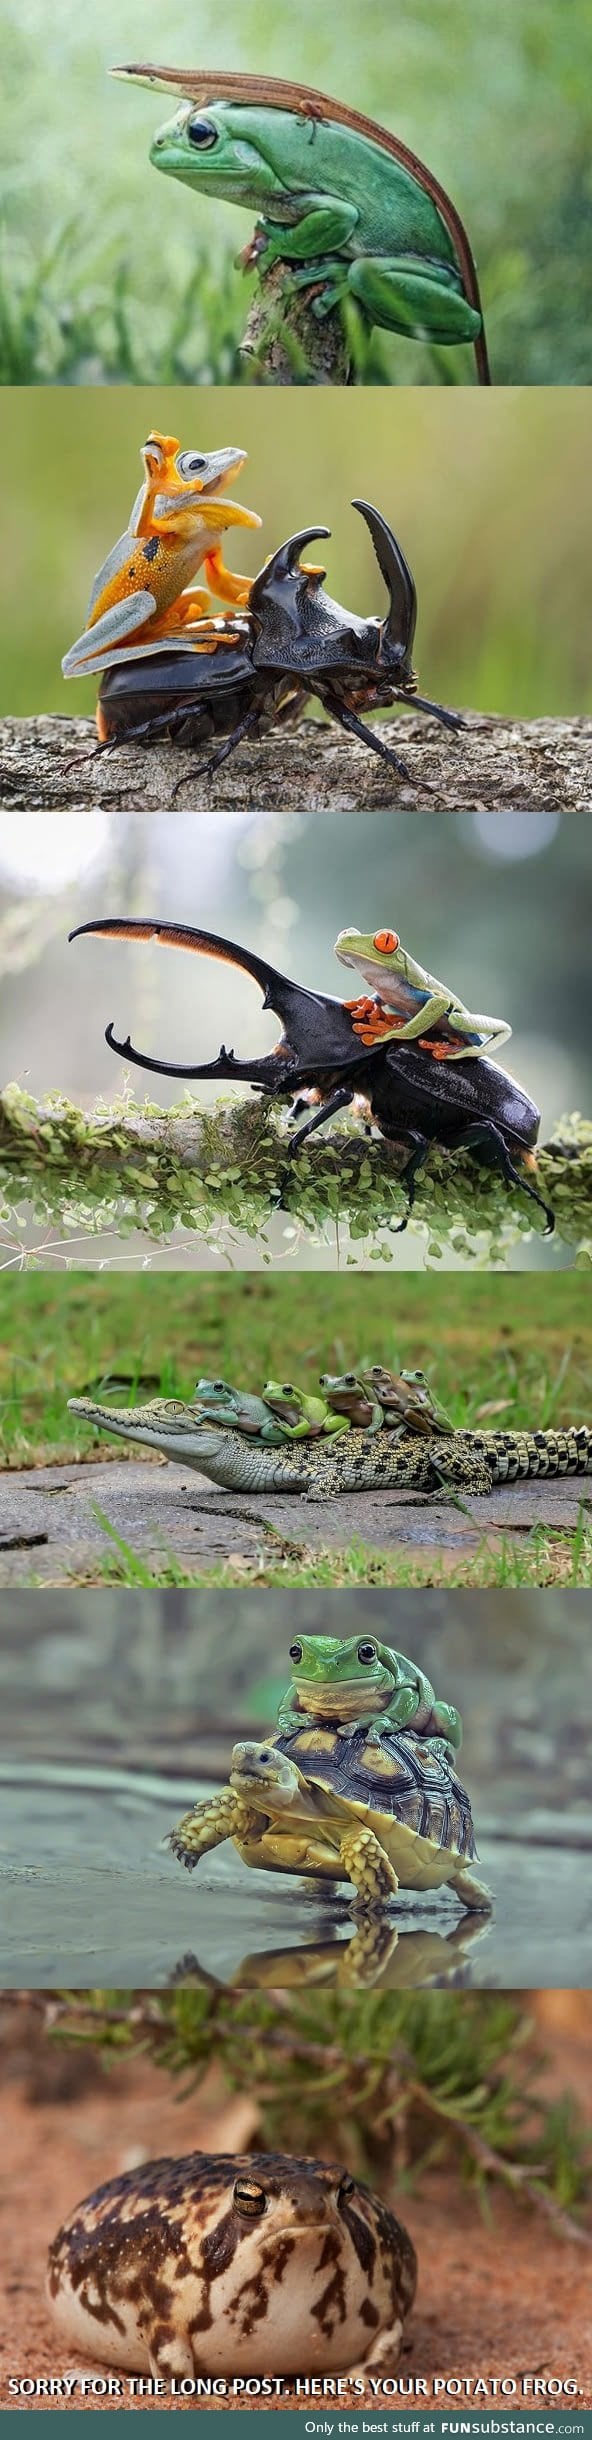 Frogs riding other animals